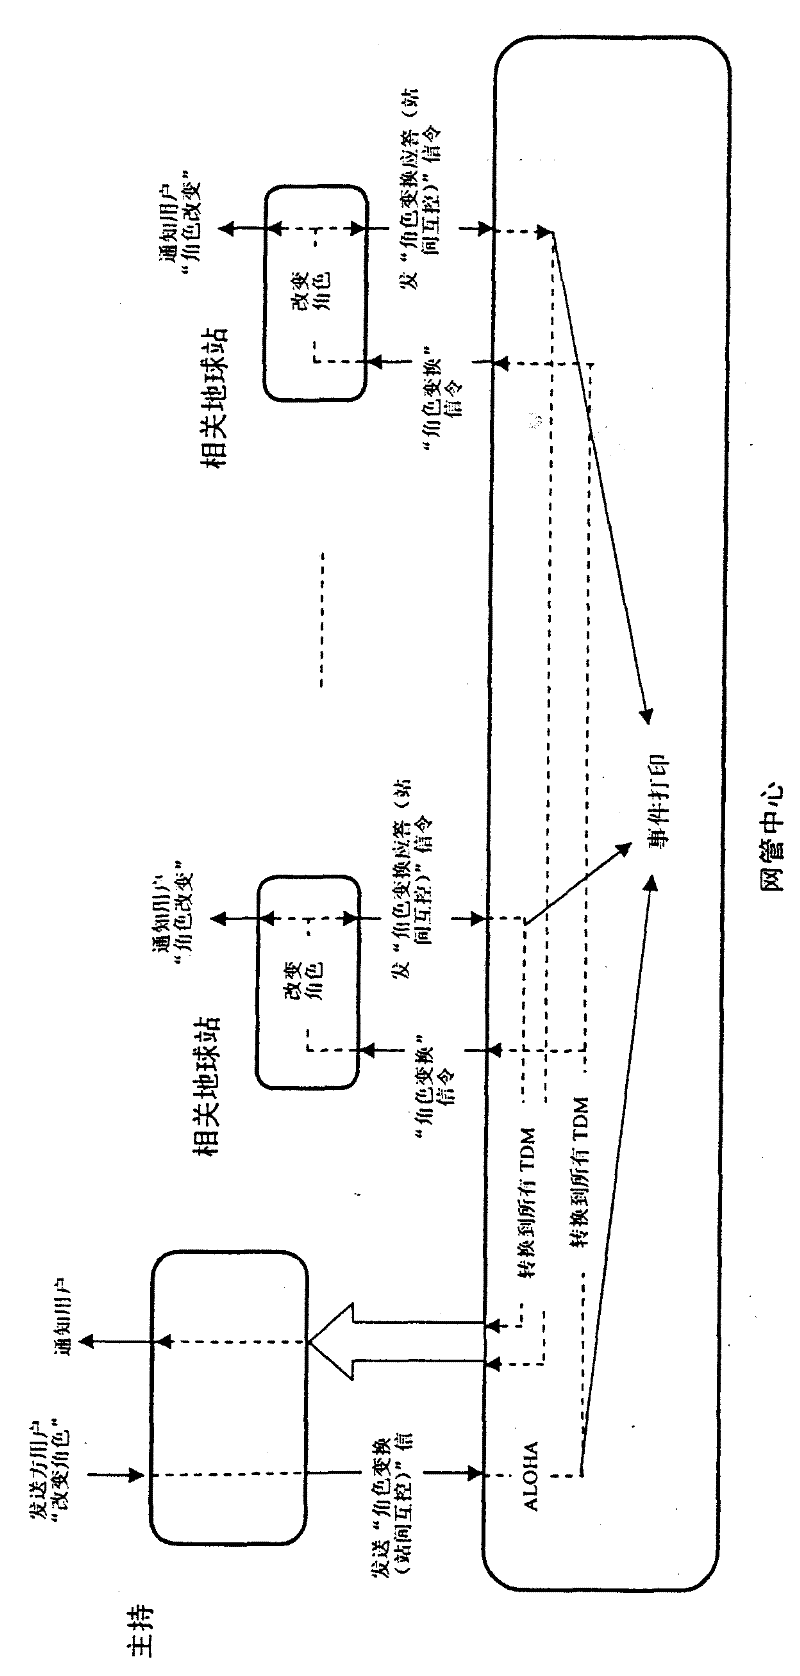 Method for realizing fully automatic configuration of broadband video conference broadcasting service based on earth satellite station